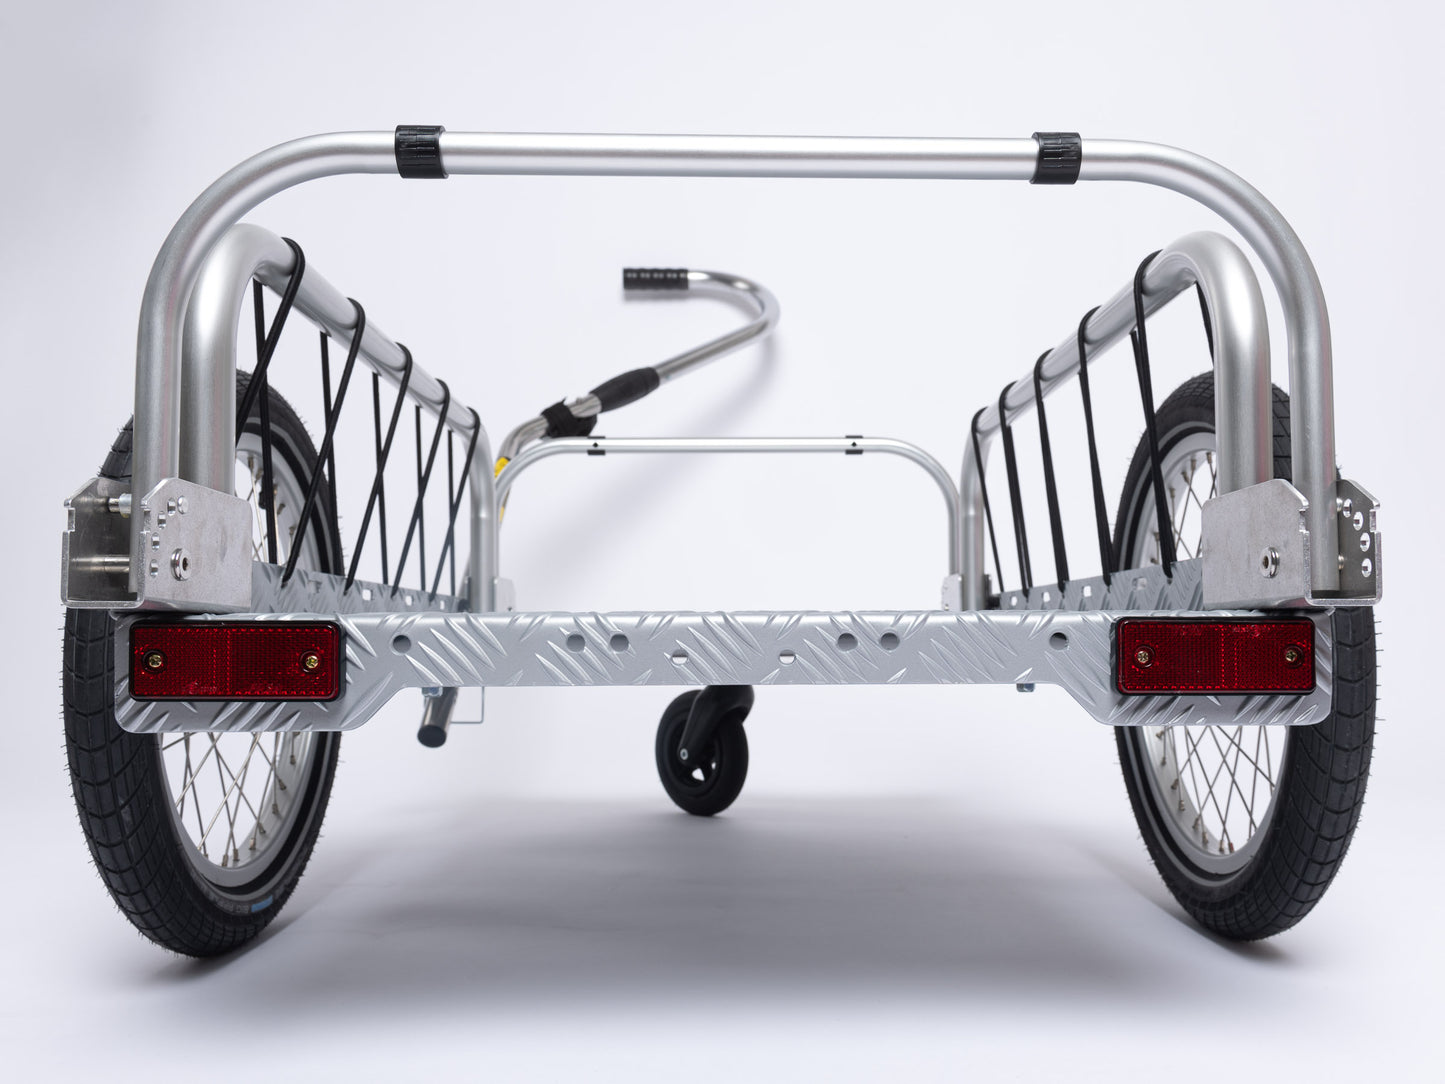 "DRAG" hand truck set with drawbar and front wheel for HAUTOO bicycle trailers